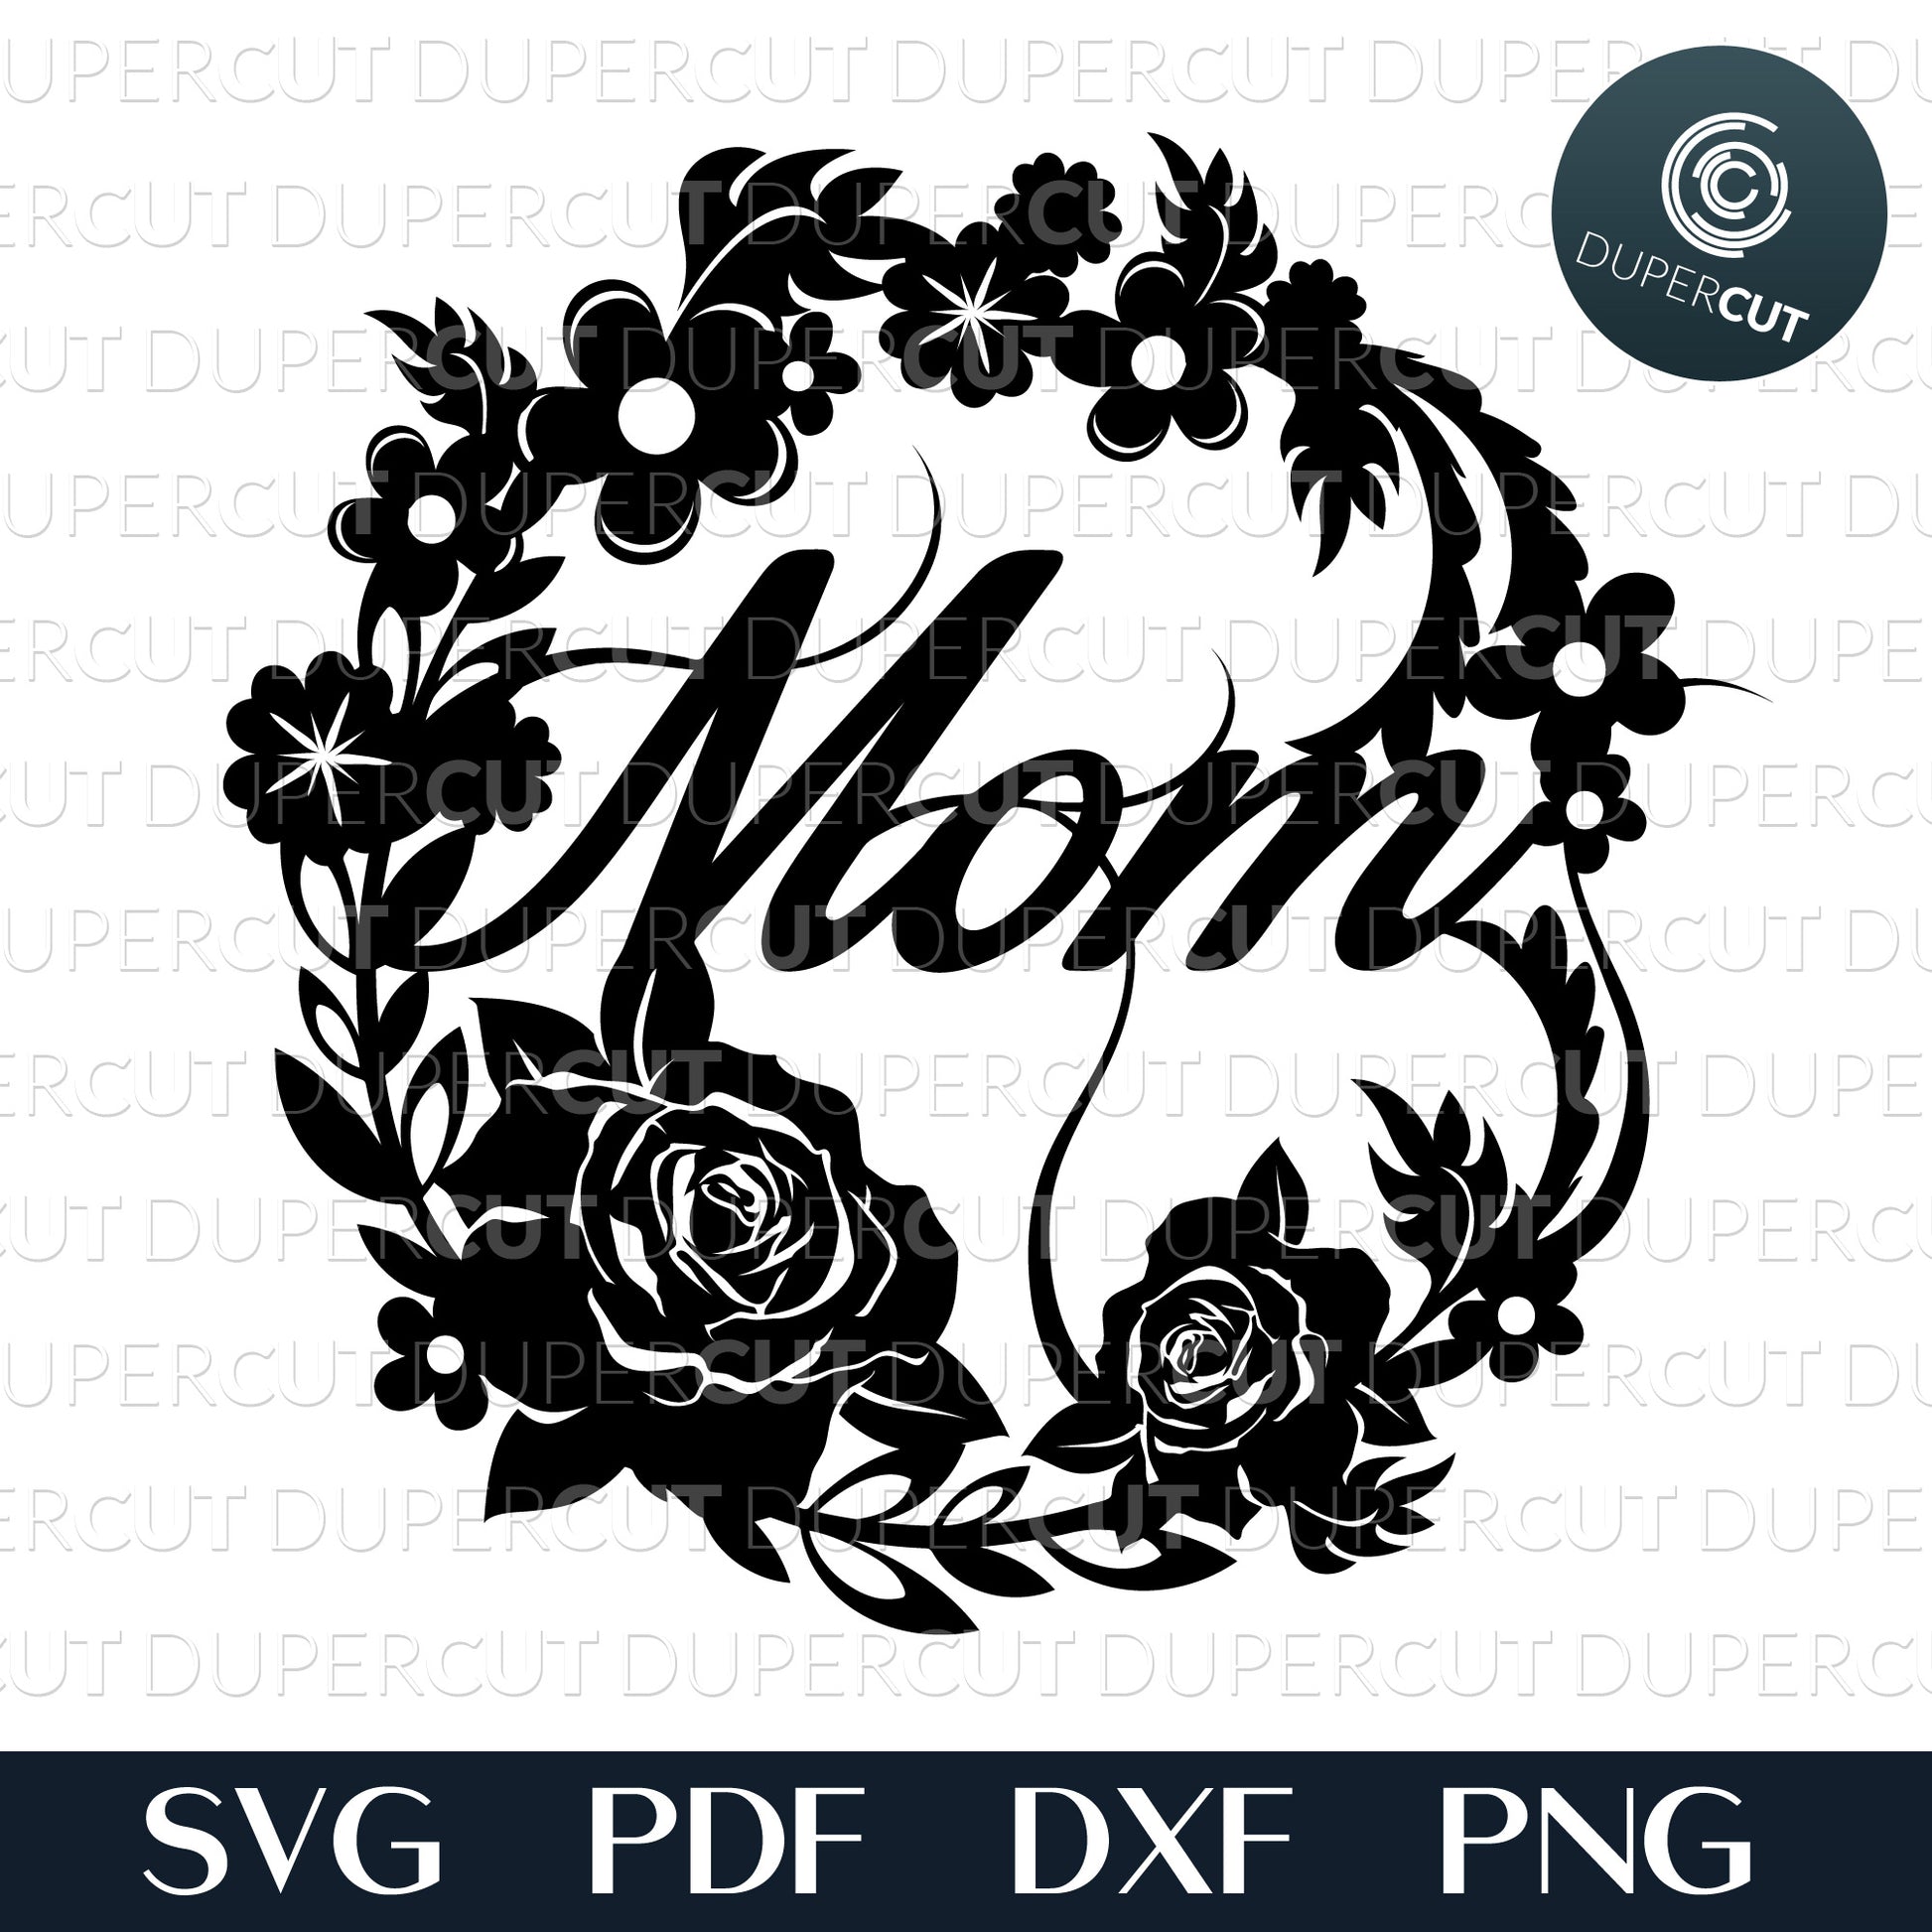 Mom floral wreath, DIY Mother's Day gift. SVG JPEG DXF files. Template for paper cutting, laser, print on demand. For use with Cricut, Glowforge, Silhouette Cameo, CNC machines. Personal or commercial license.